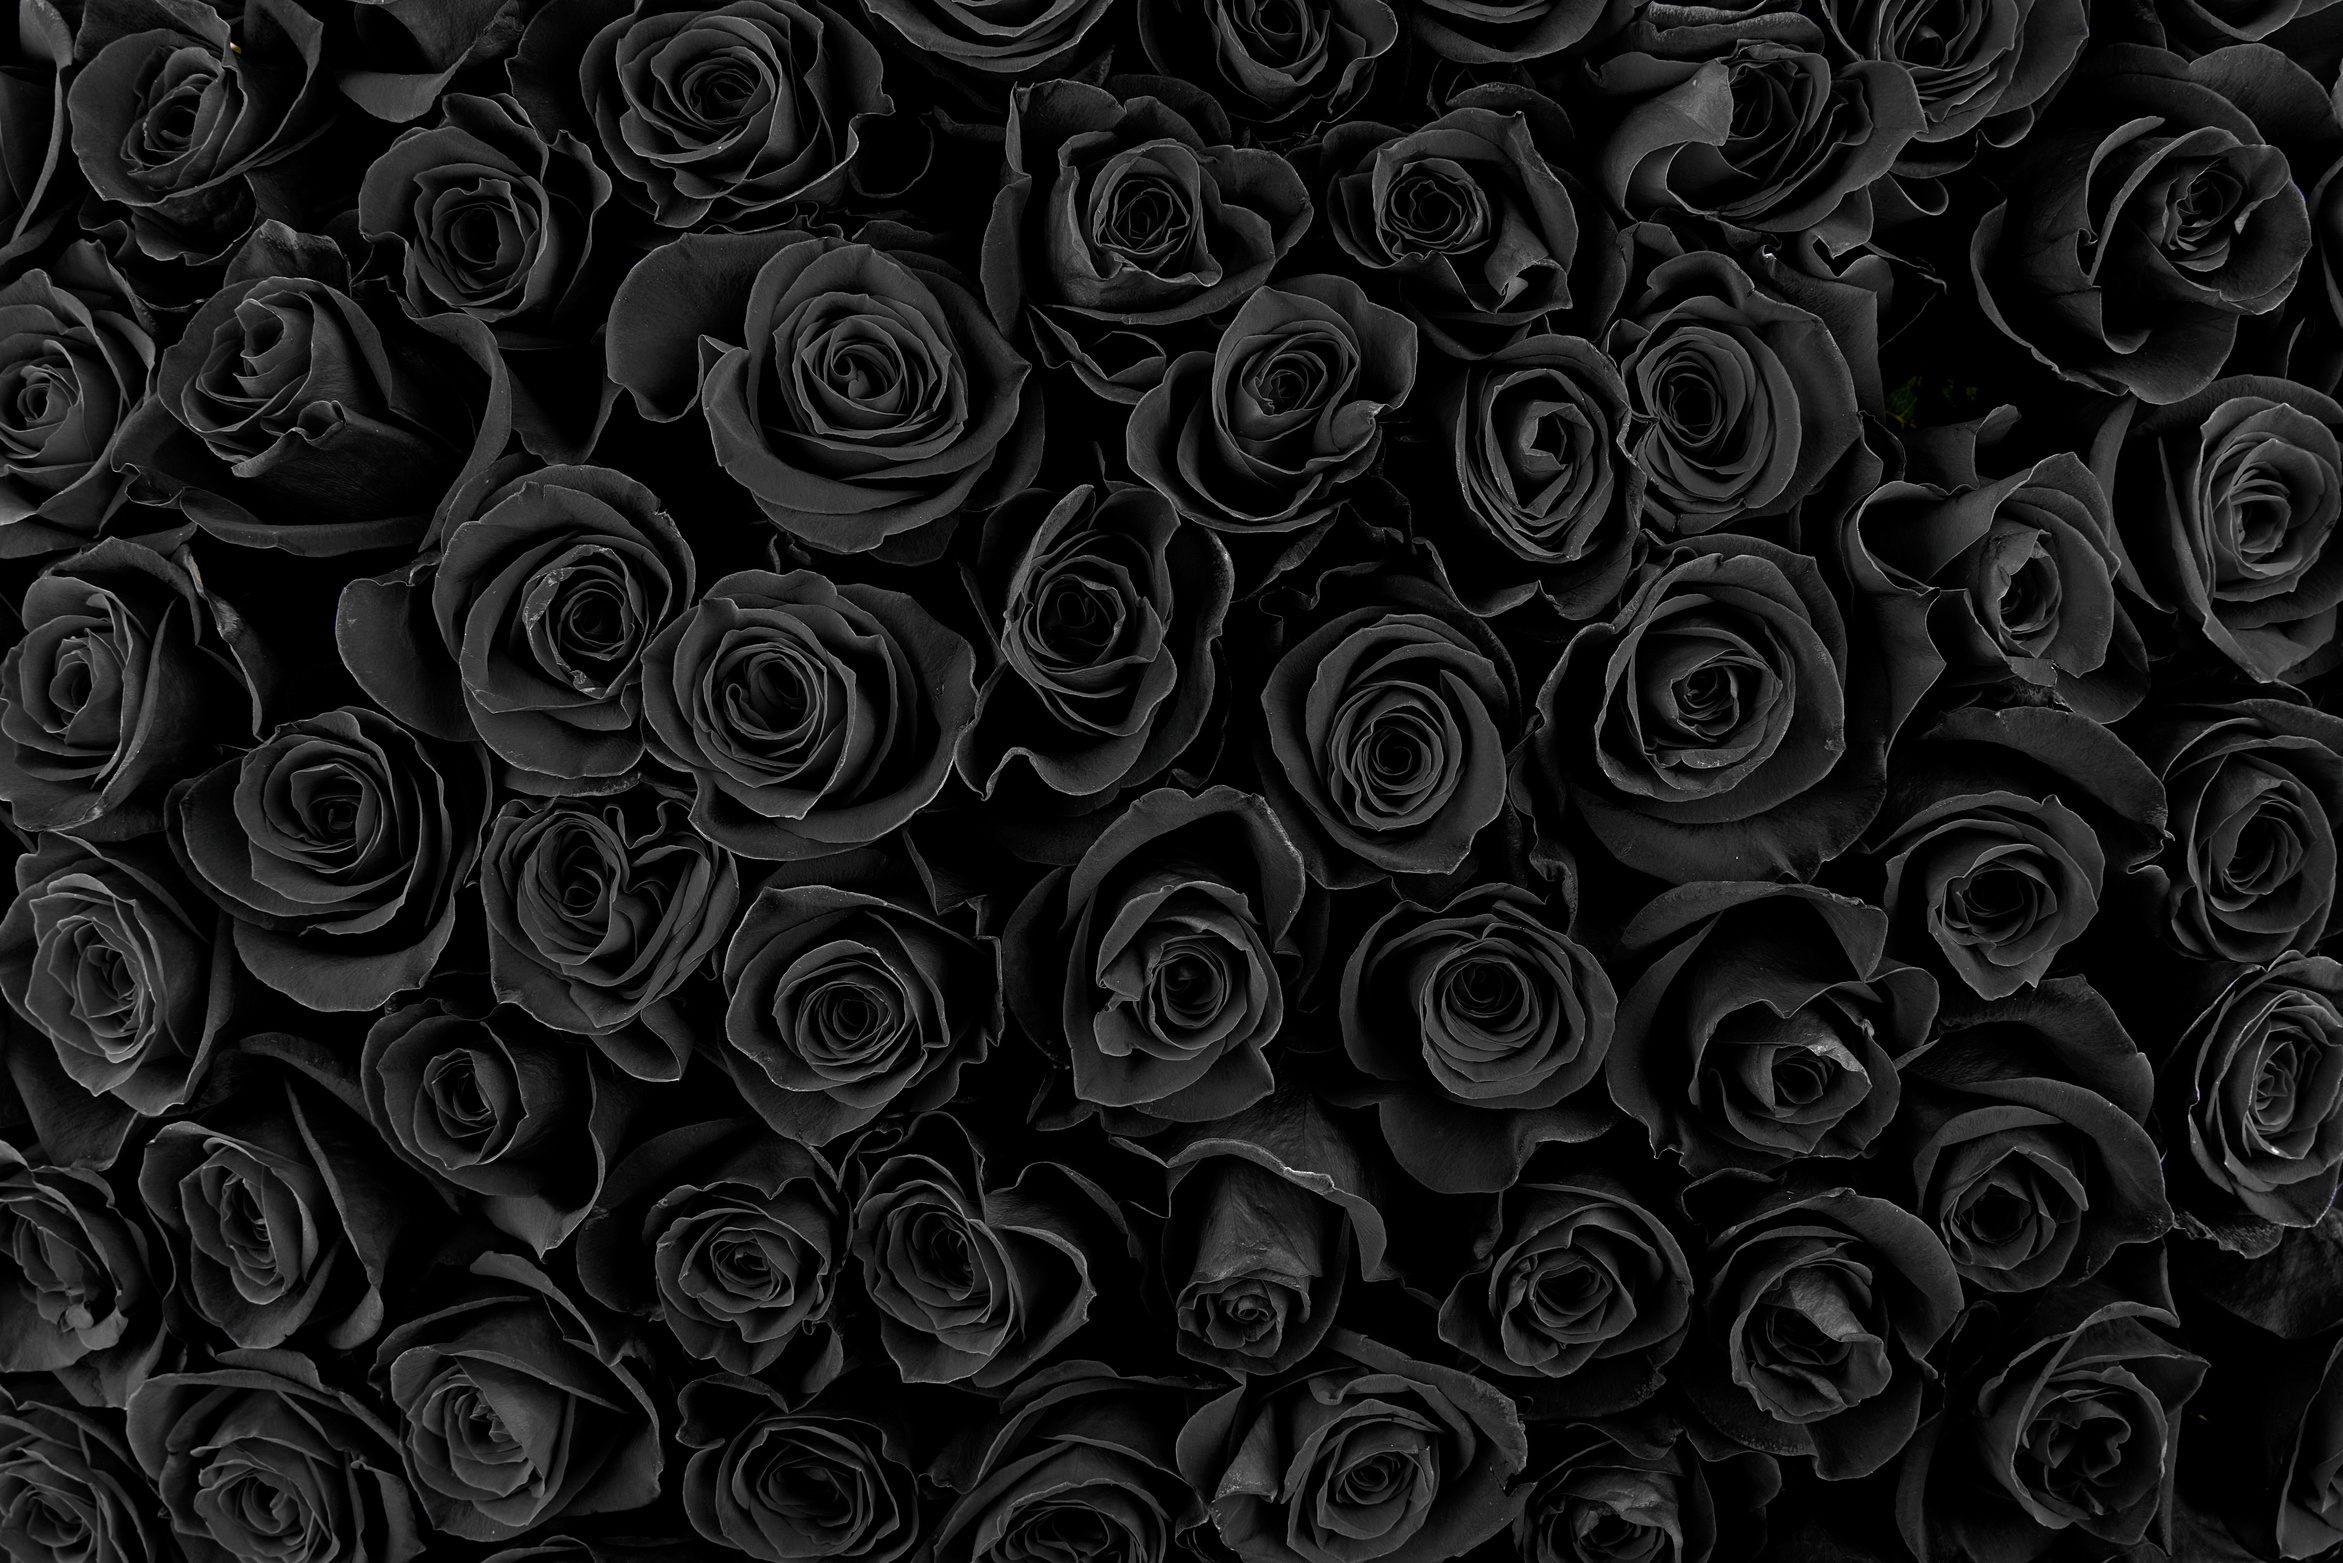 Beautiful Black Roses. Floral Background